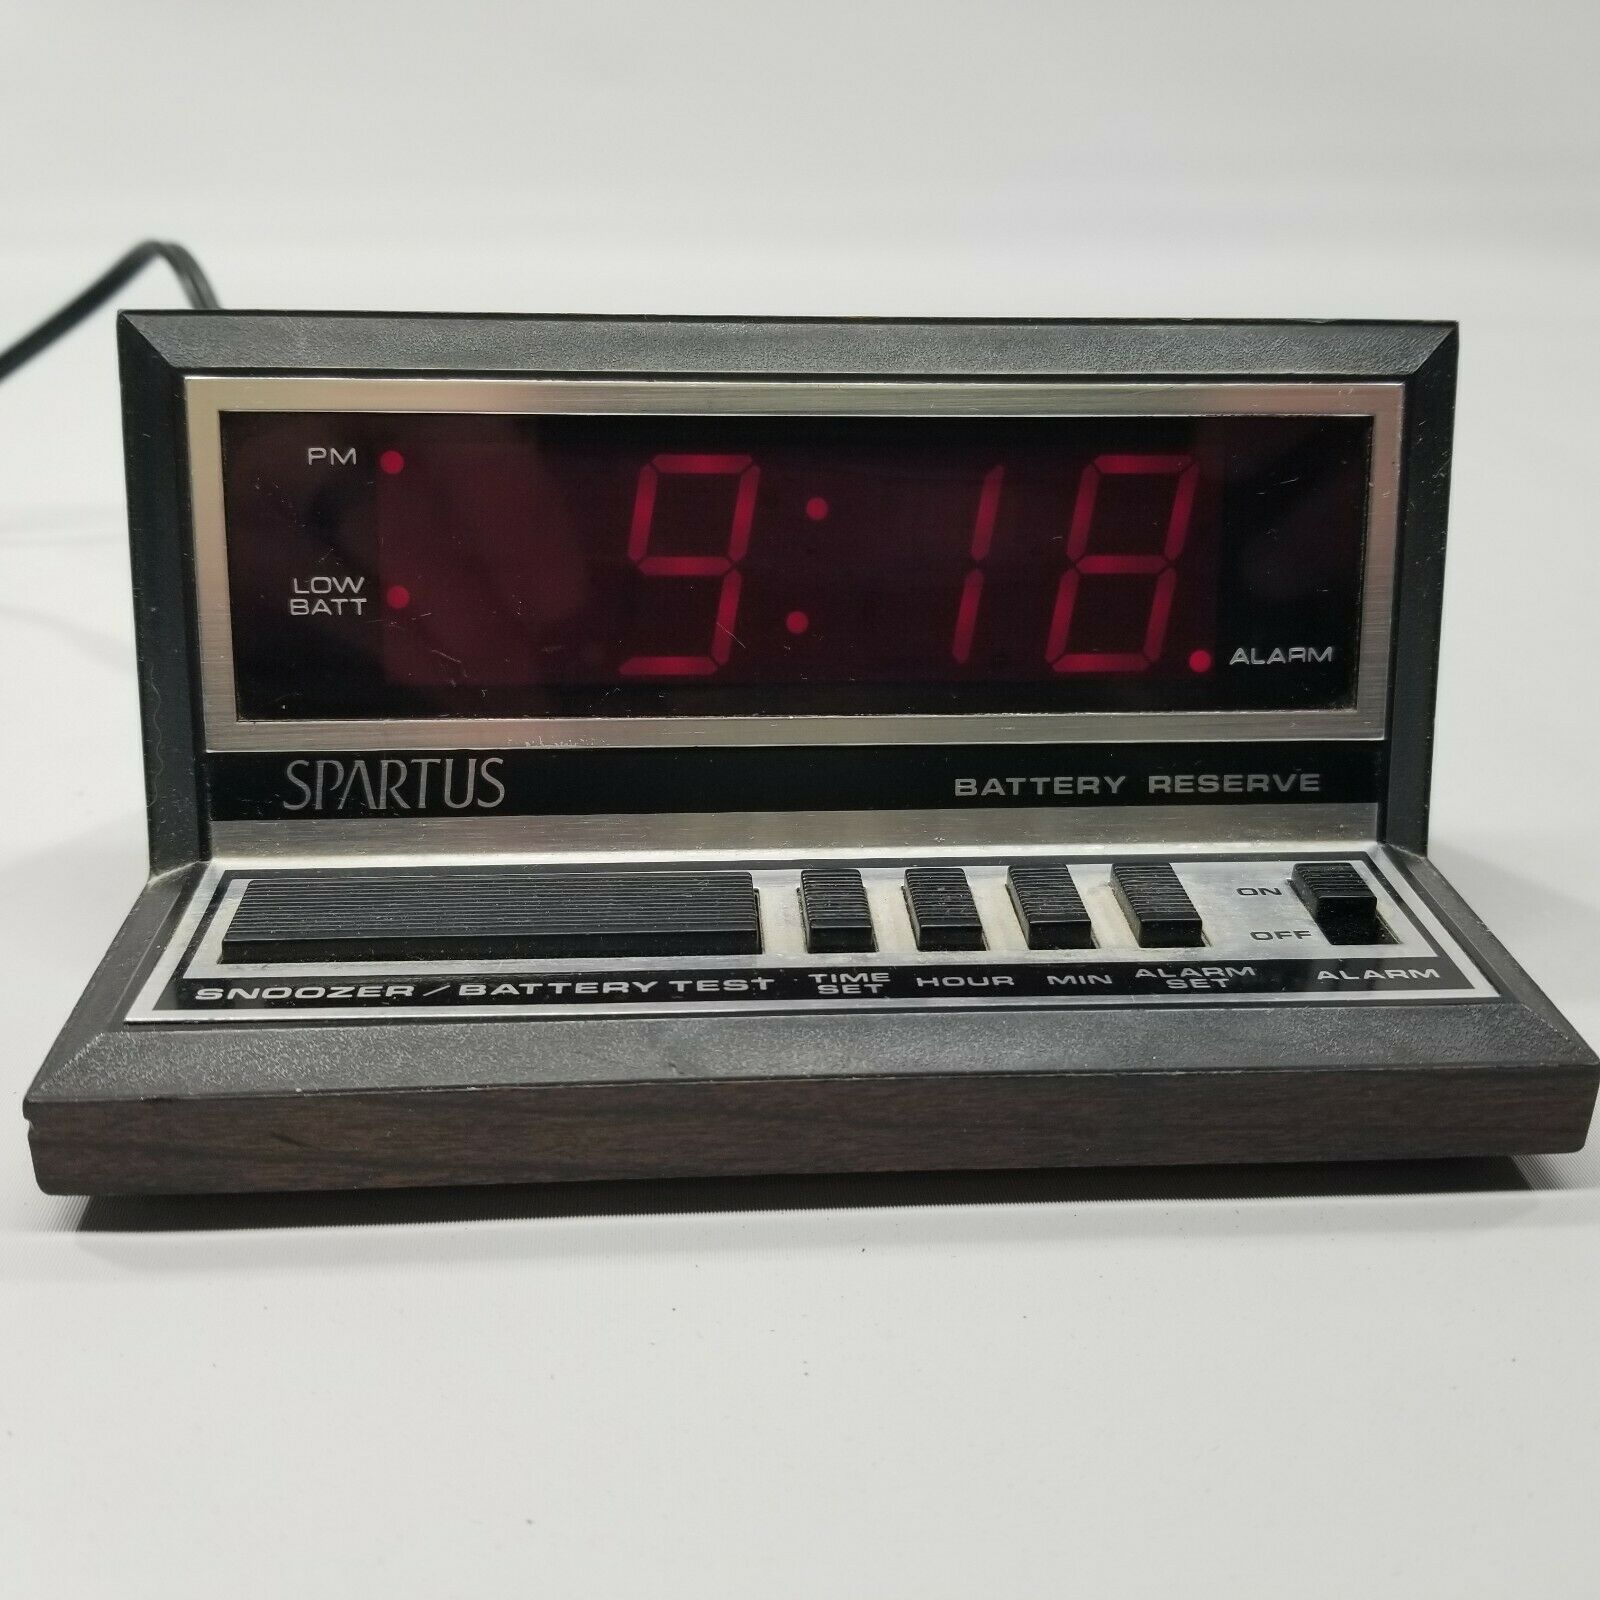 Details about   Spartus Model 1140 Vintage Electric Alarm Clock Red LCD W/ Battery Backup Tested 